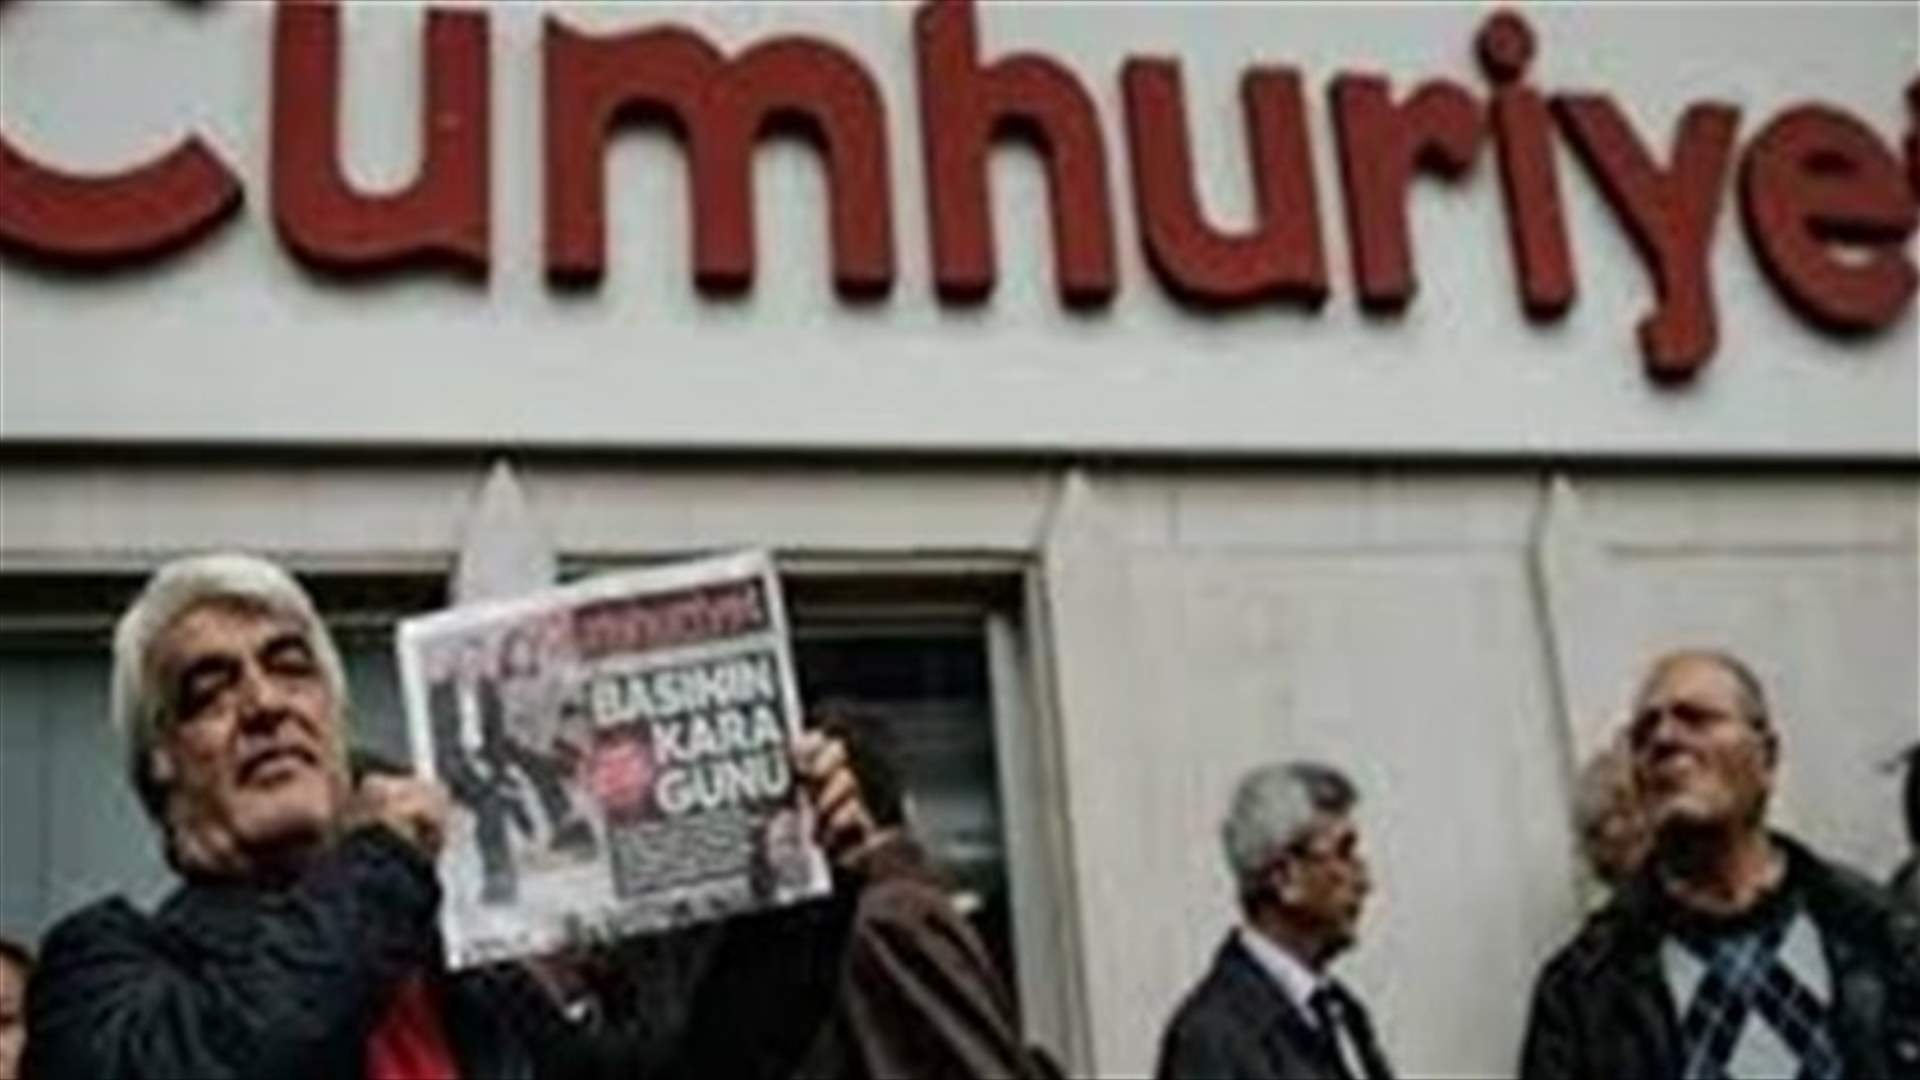 Turkey detains chairman of opposition Cumhuriyet daily, paper says